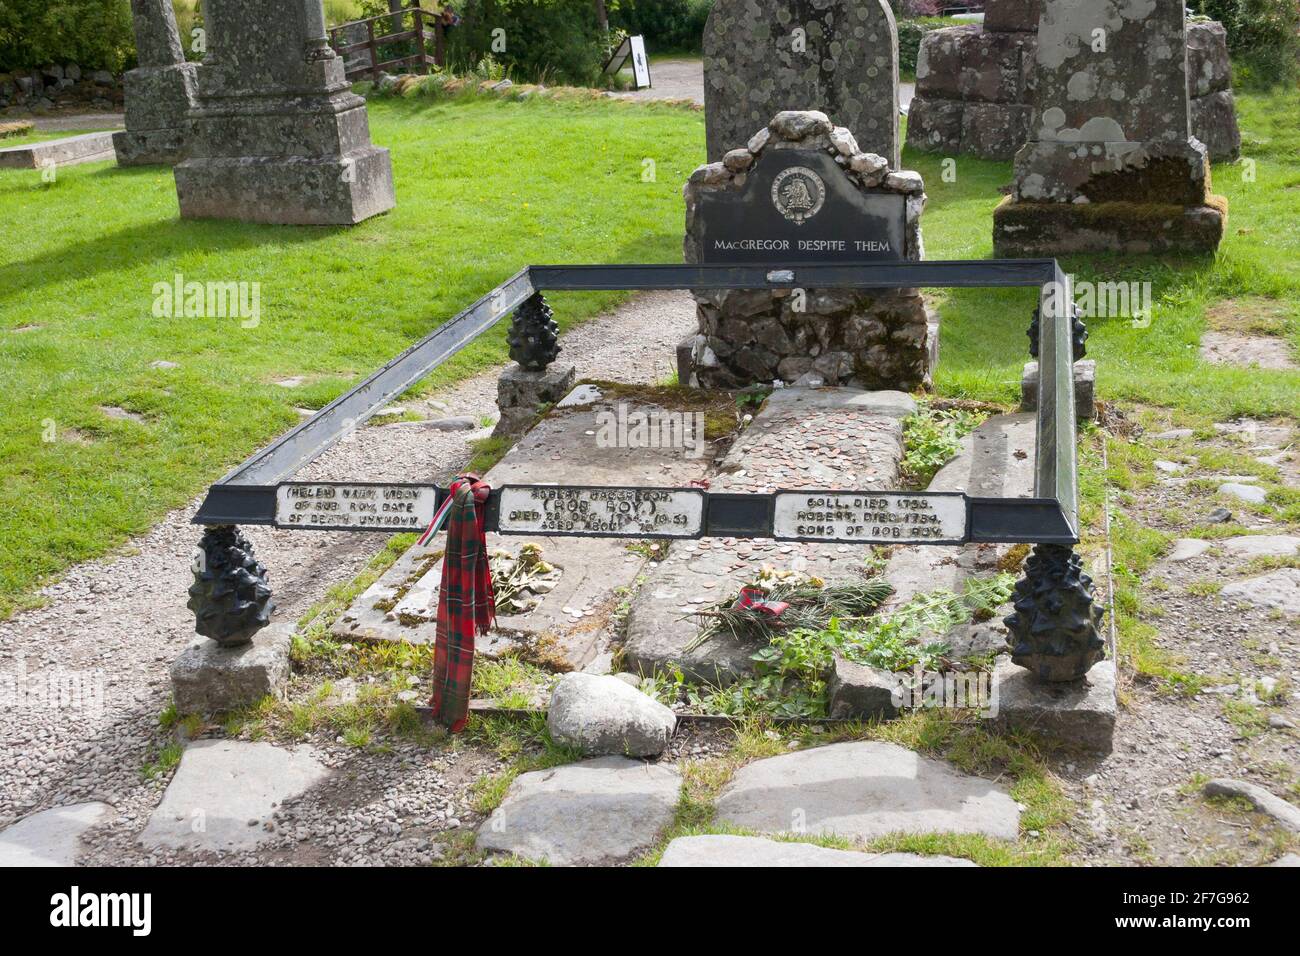 Grave of Rob Roy McGregor at Balquidder Parish Church graveyard, Stirlingshire, Scotland. Buried along side is the grave of his wife, Helen, and his s Stock Photo